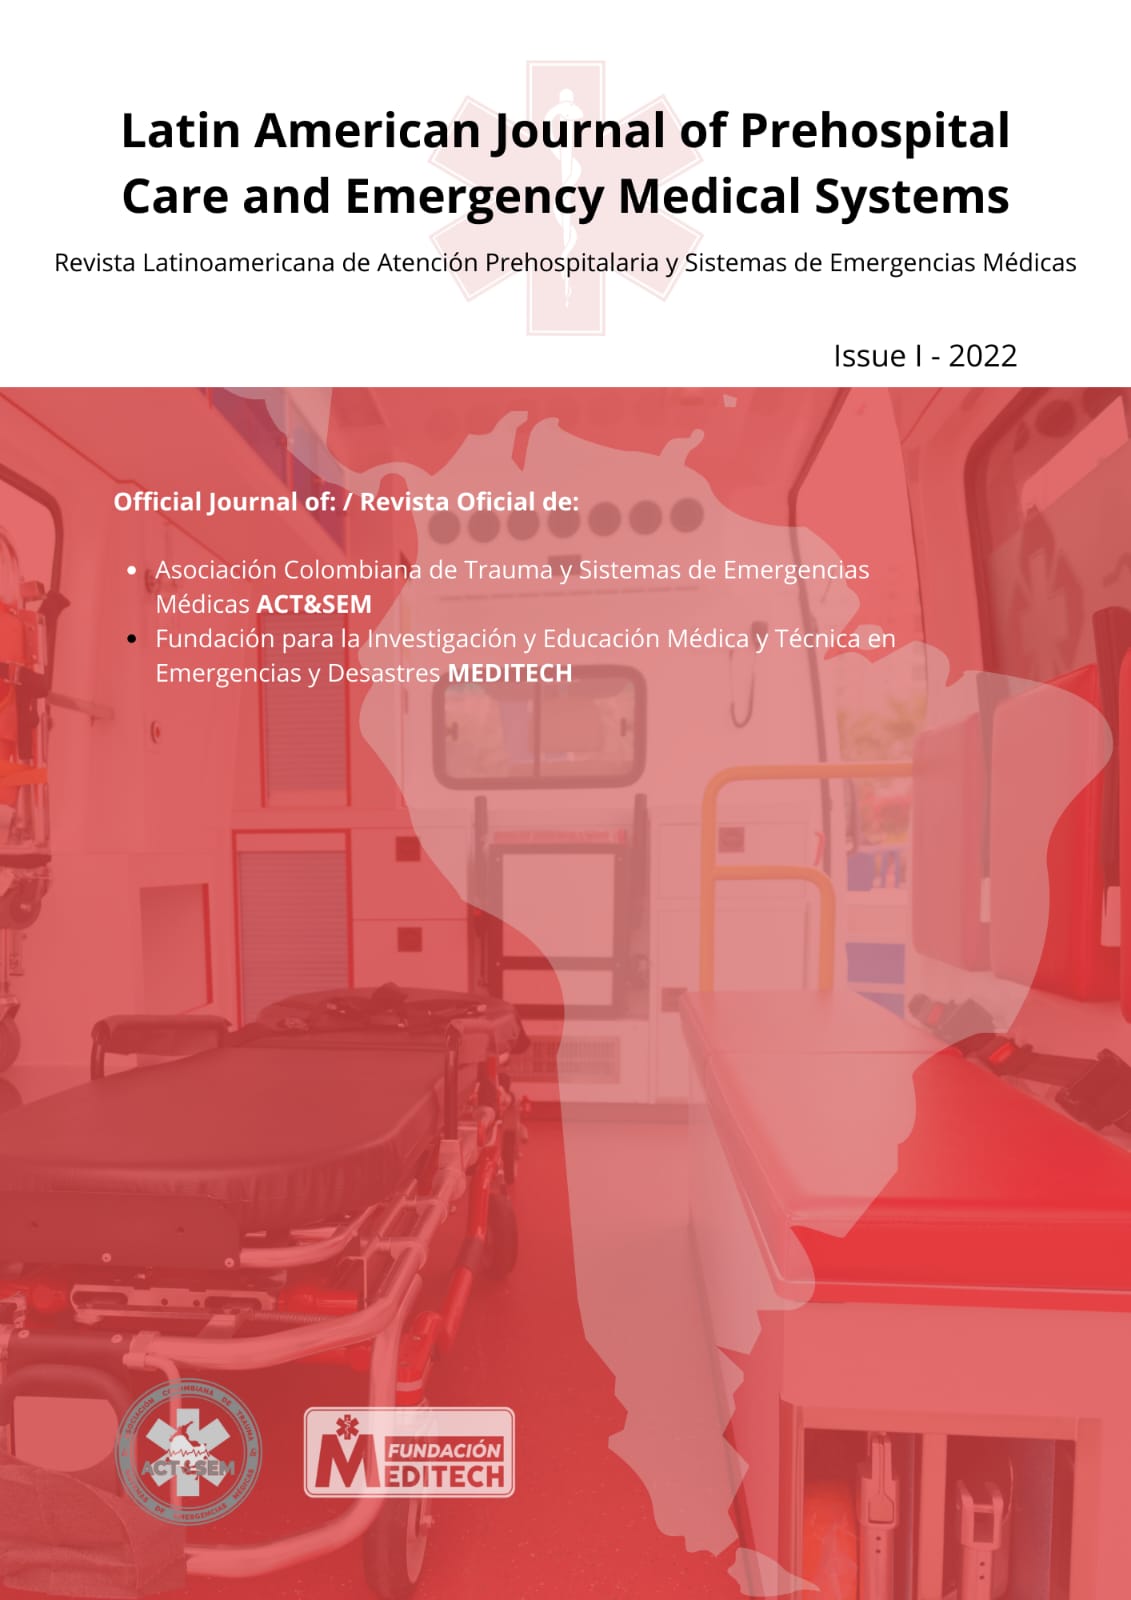 					Ver Vol. 1 Núm. 1 (2022): Latin American Journal Of Prehospital Care And Emergency Medical Systems
				